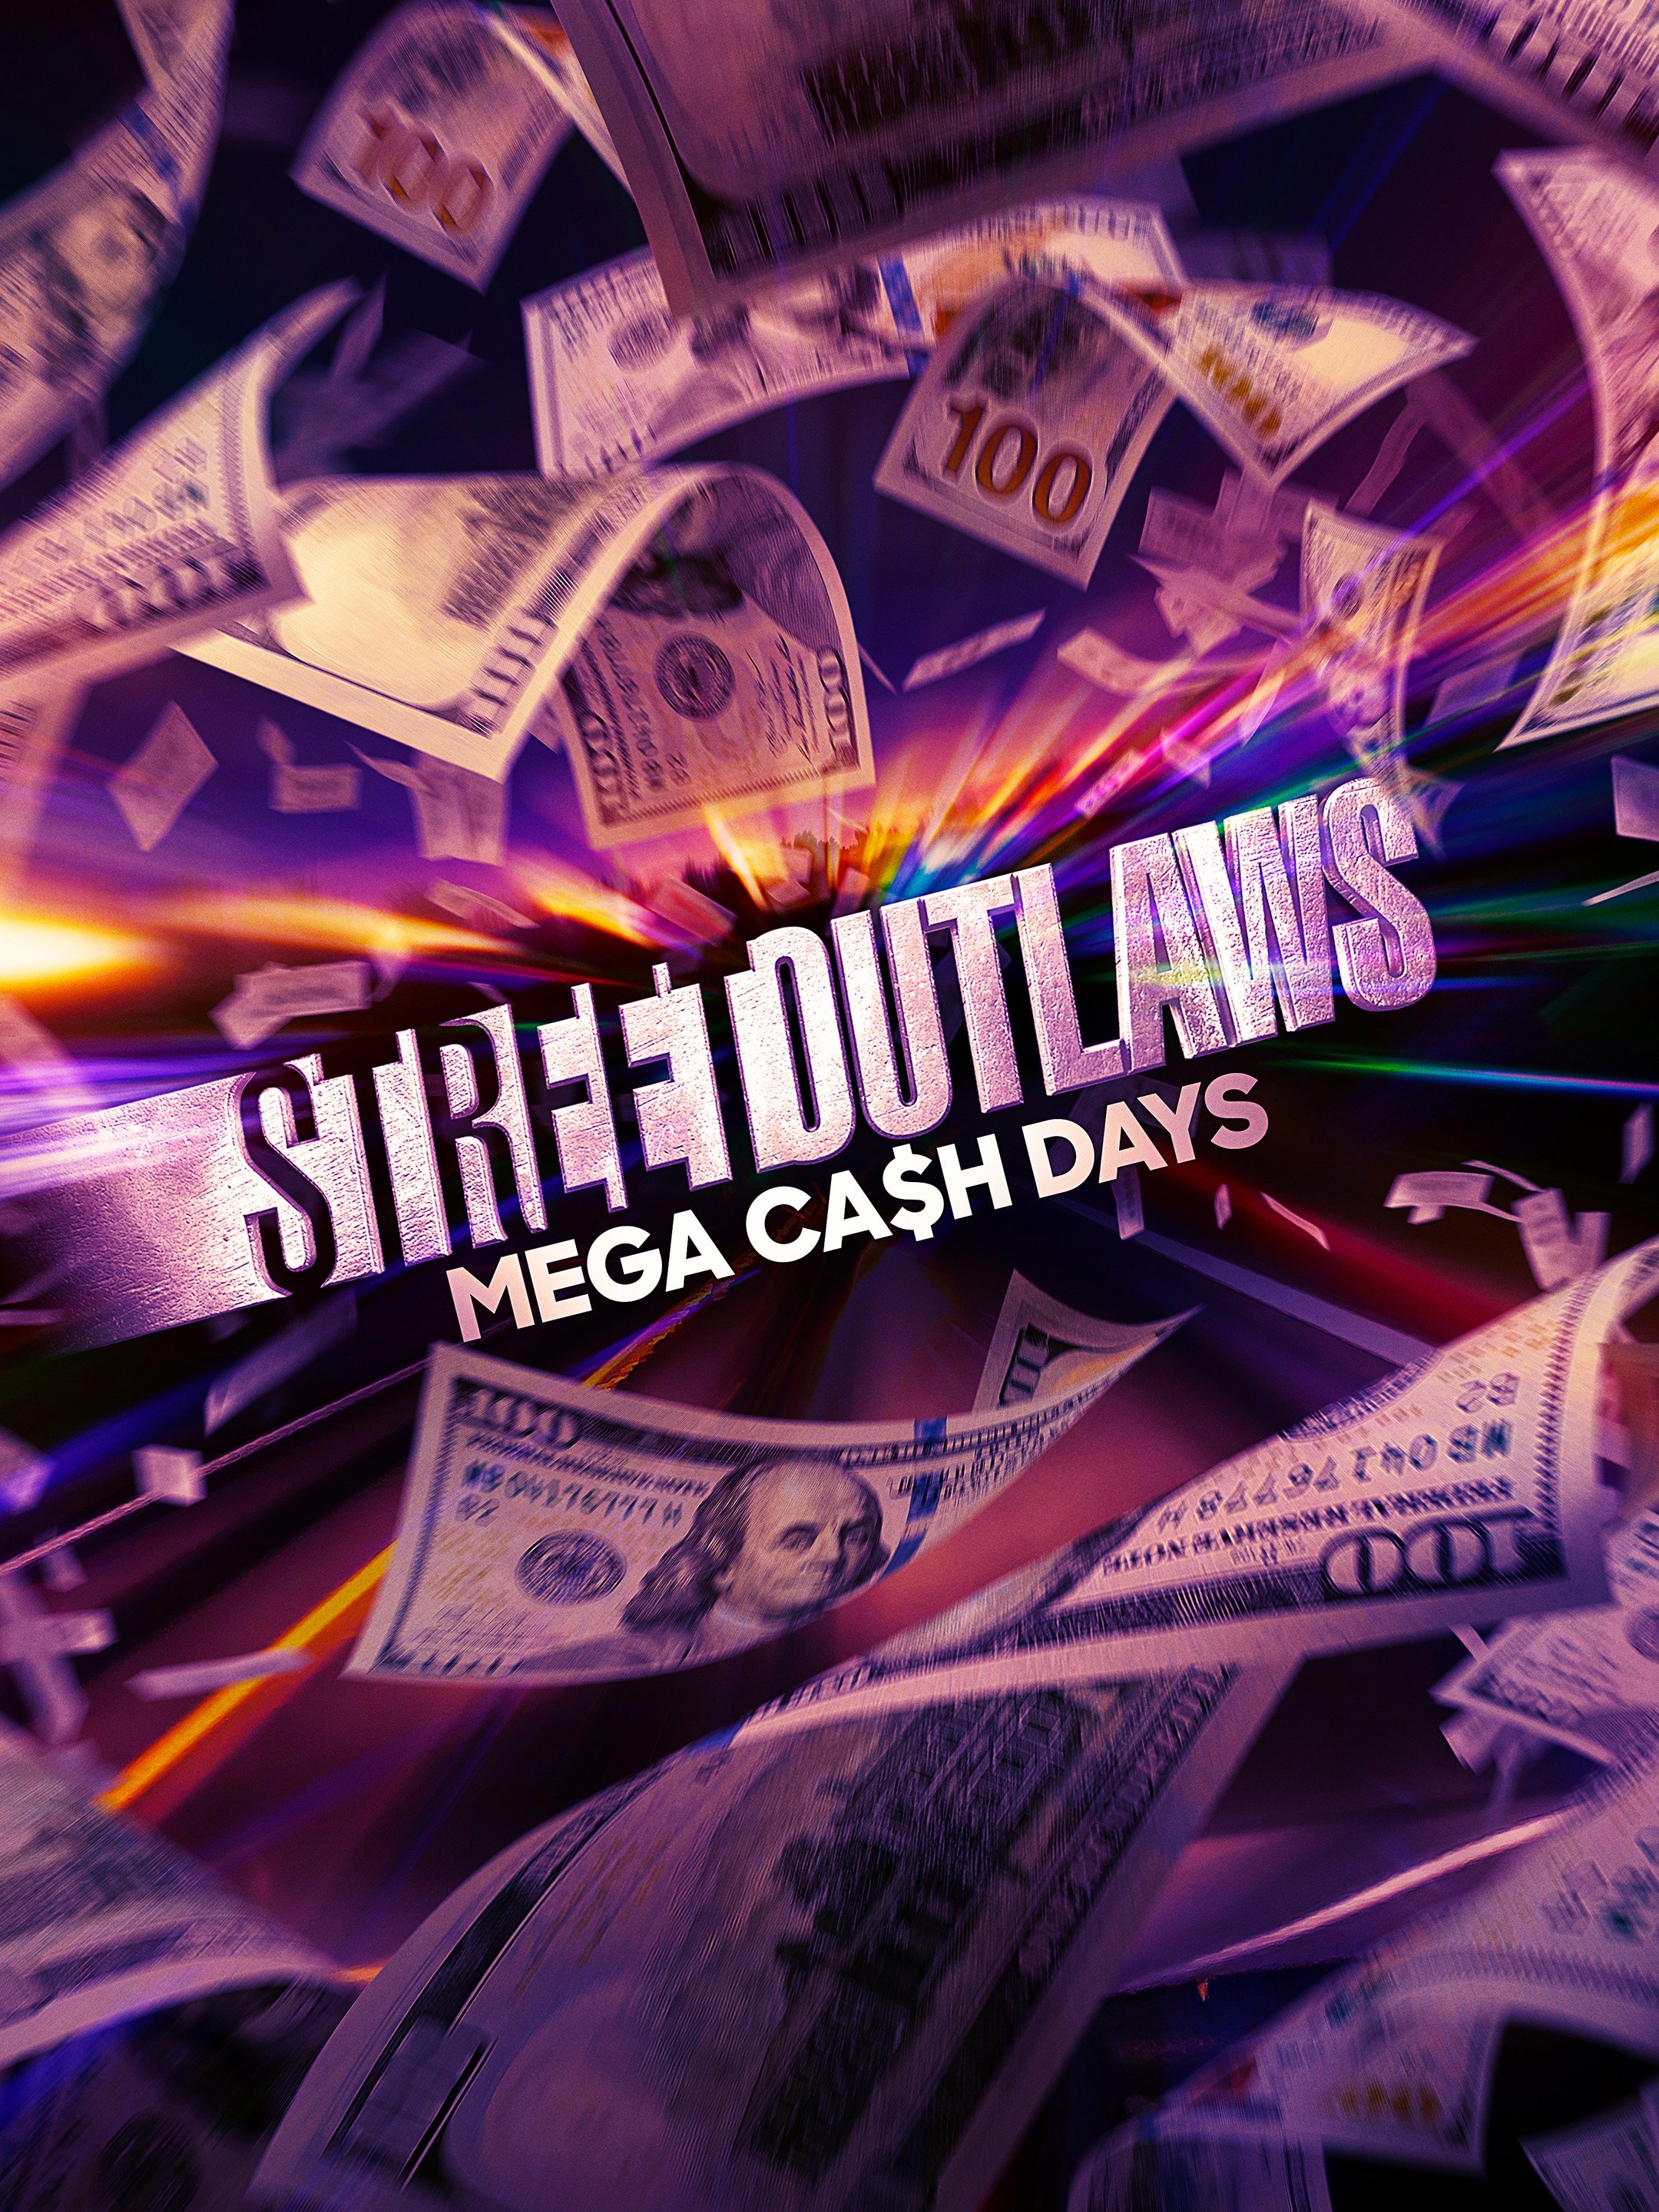 Street Outlaws Mega Cash Days picture